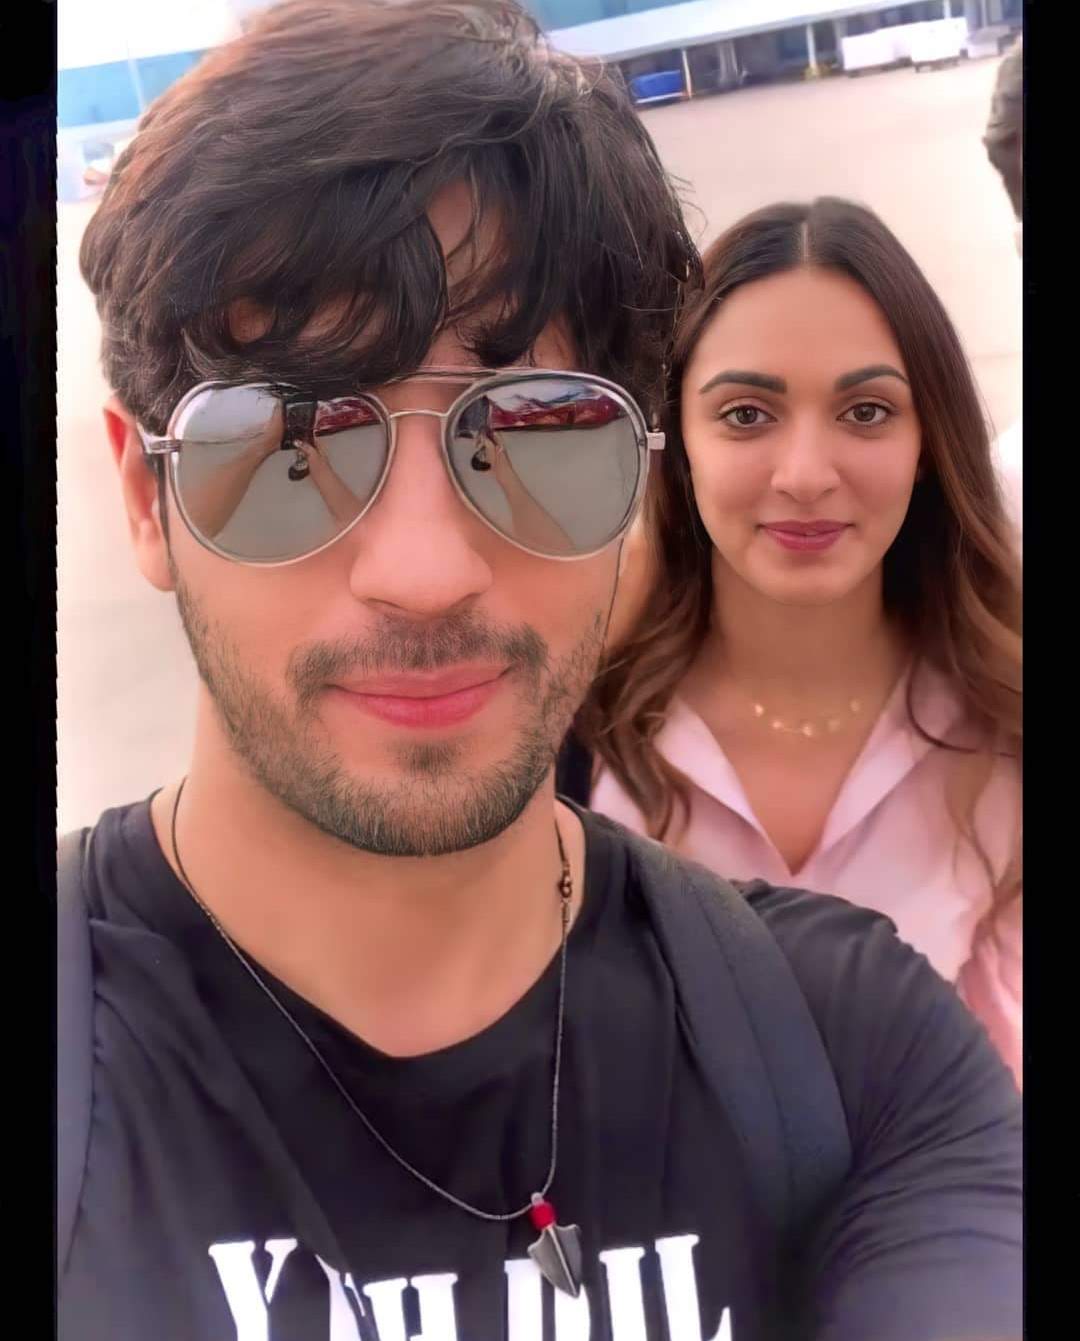 Sidharth Malhotra spills beans about his 'special bond' with Kiara Advani.